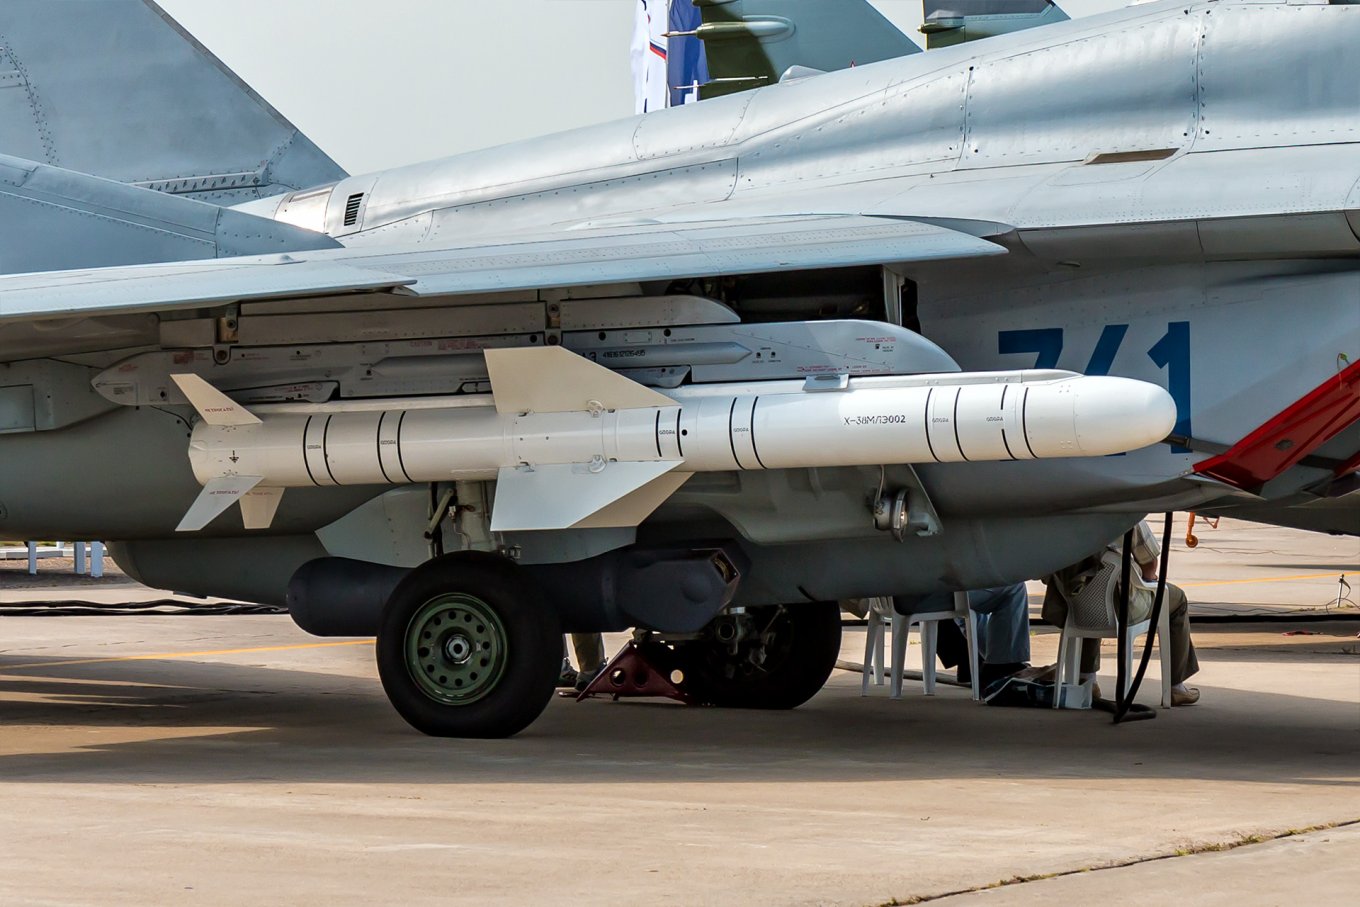 russian Kh-38 missile, Defense Express